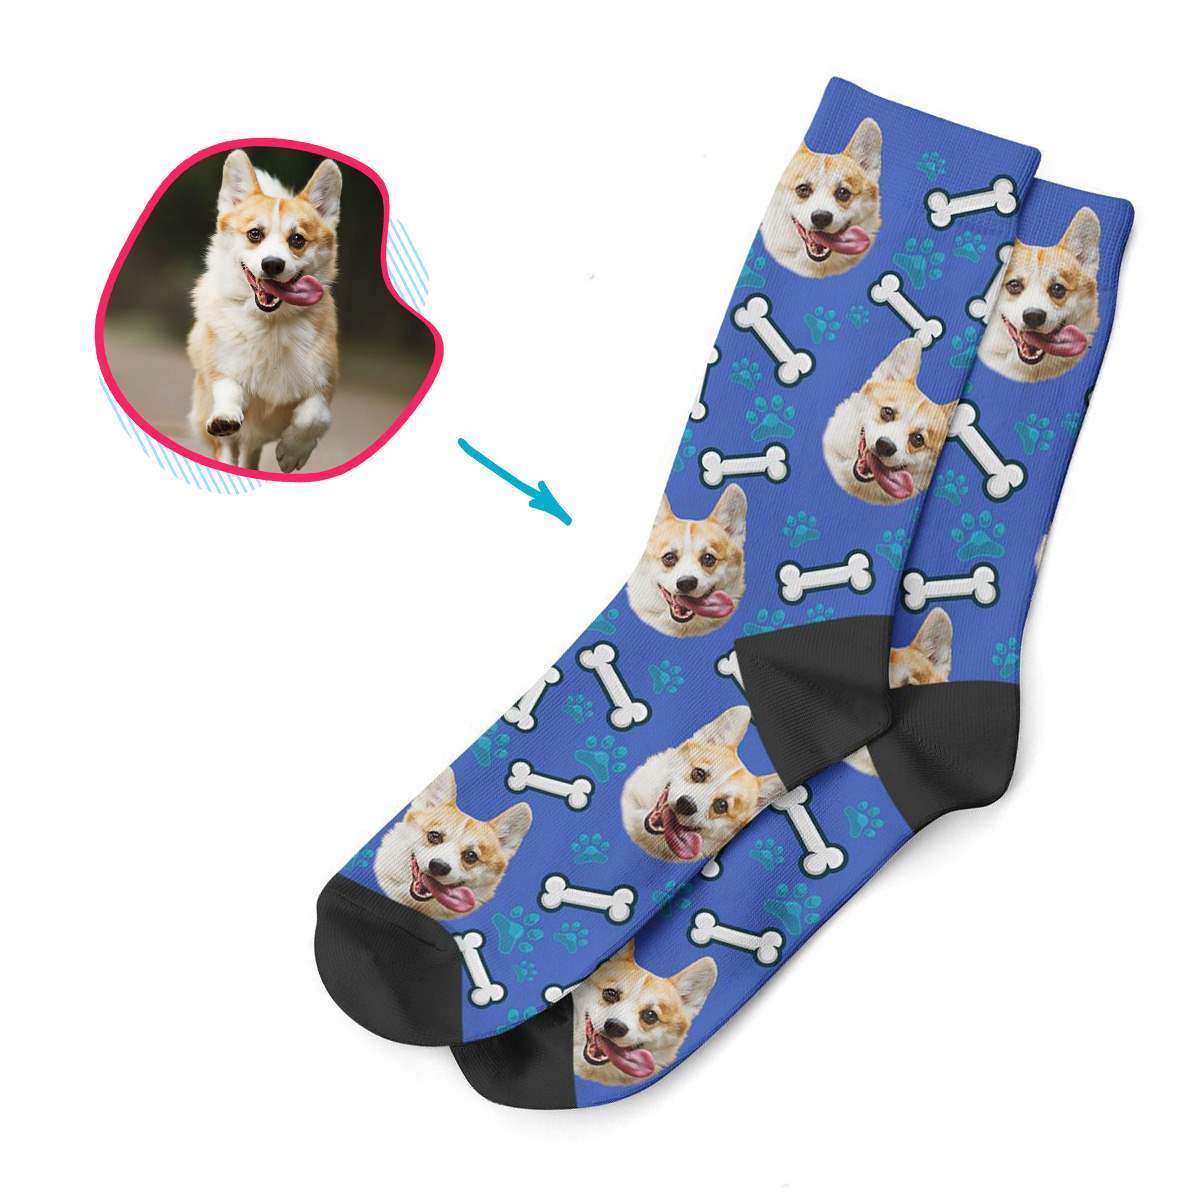 darkblue Dog socks personalized with photo of face printed on them